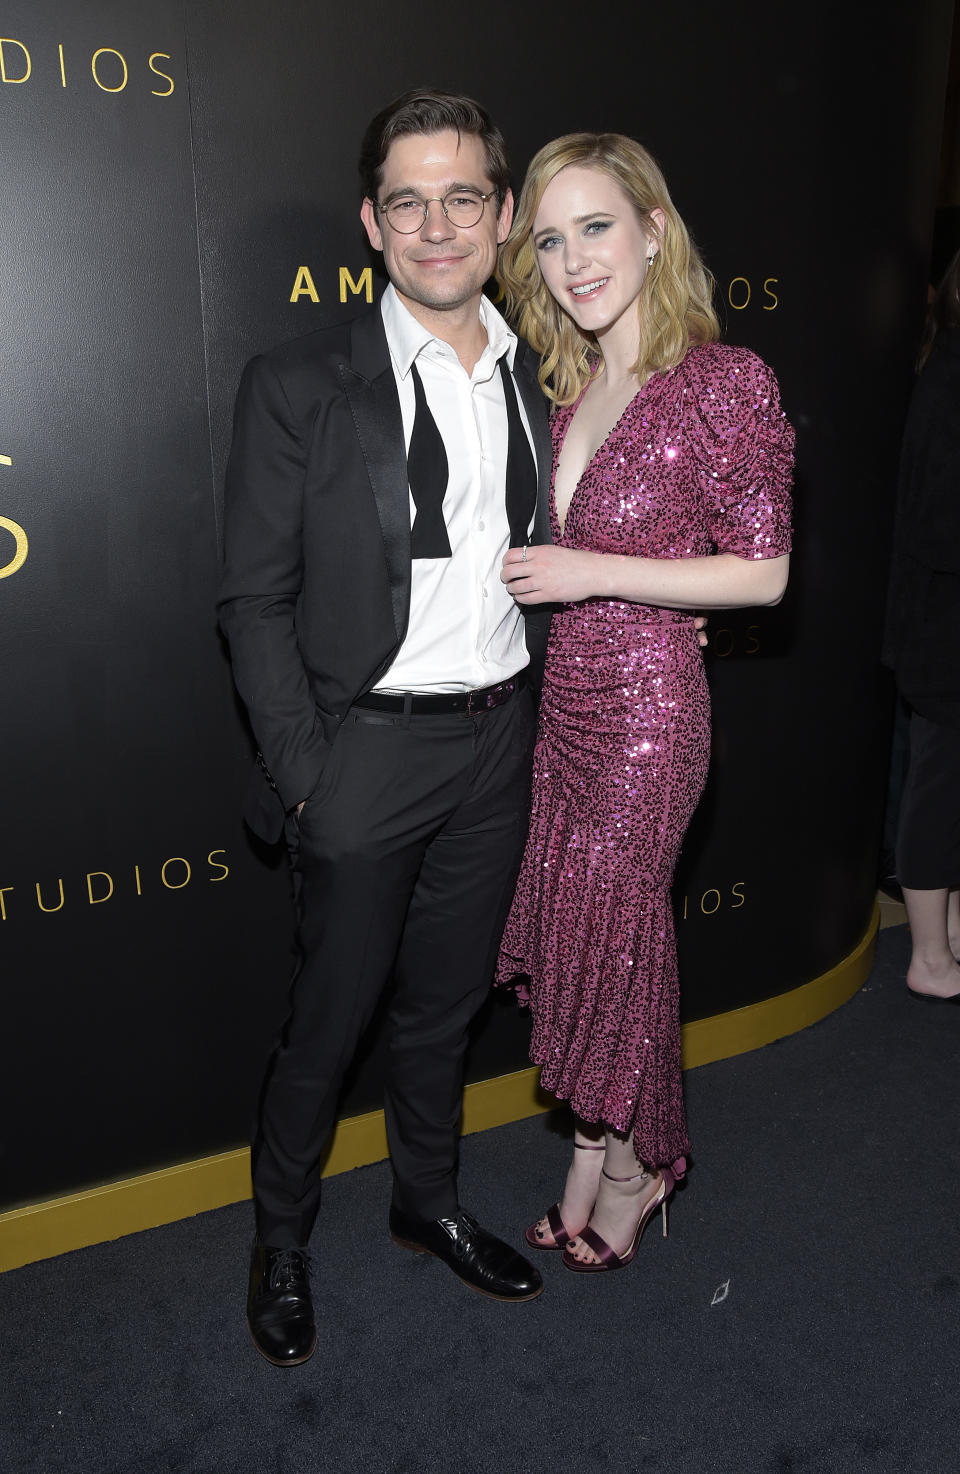 BEVERLY HILLS, CALIFORNIA - JANUARY 05: Jason Ralph and Rachel Brosnahan attend the Amazon Studios Golden Globes after party at The Beverly Hilton Hotel on January 05, 2020 in Beverly Hills, California. (Photo by Michael Tullberg/FilmMagic)